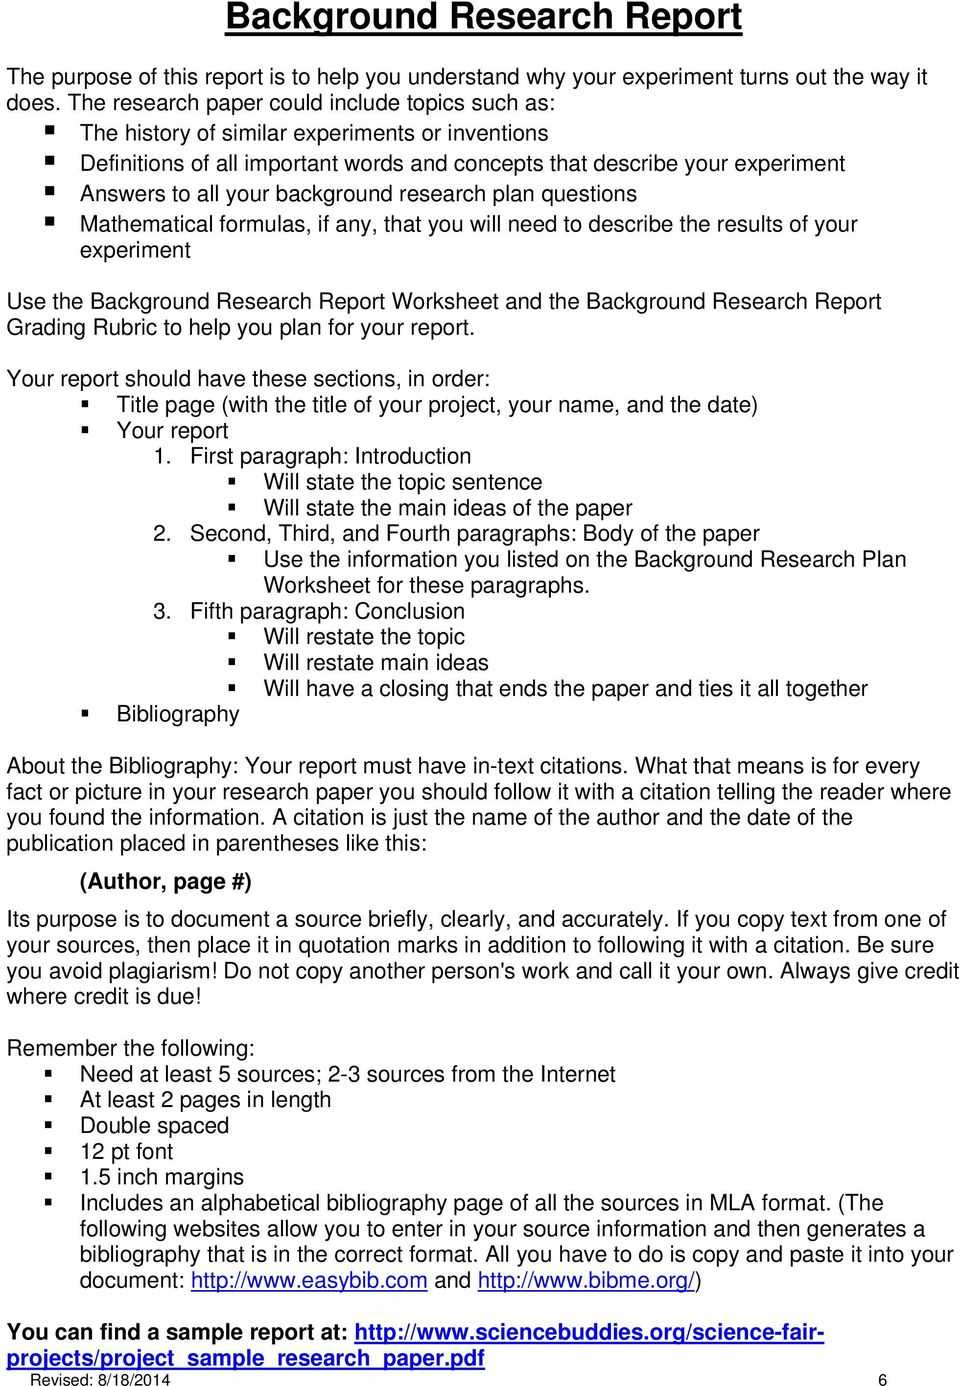 Research Paper Science Fair Project Template Introduction In Research Report Sample Template